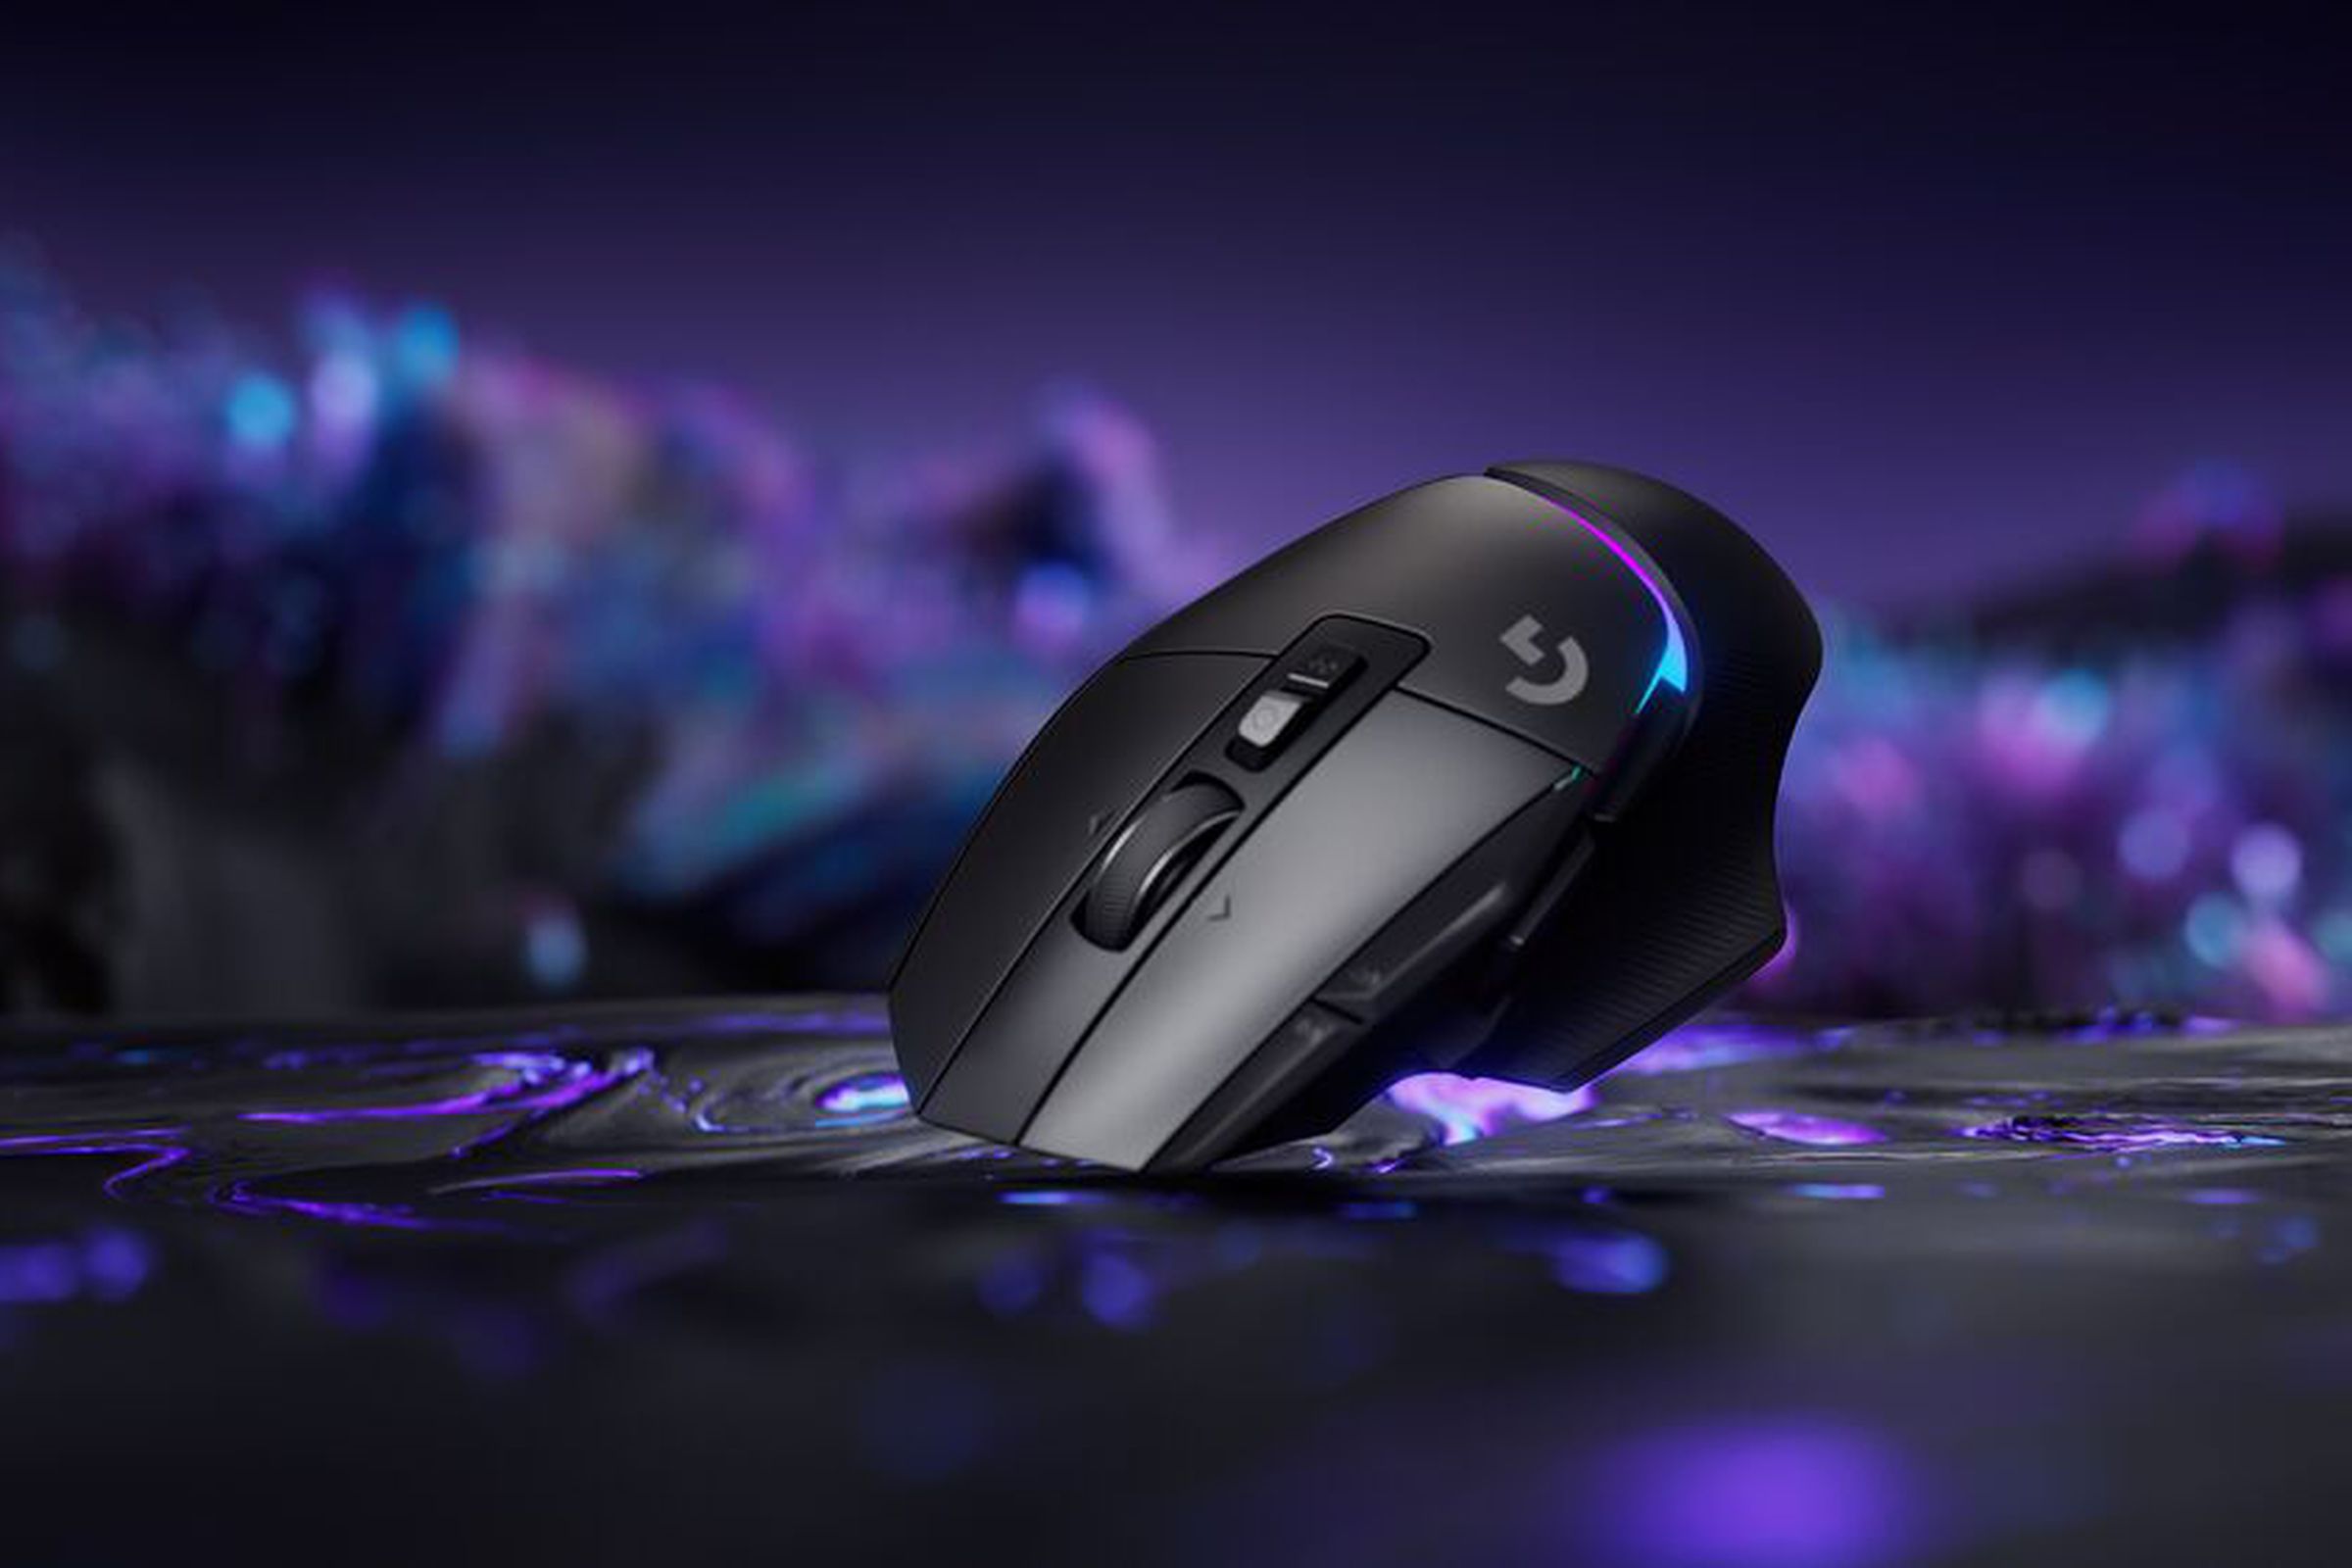 Logitech’s new G502 X Plus is the top model with Lightsync RGB.